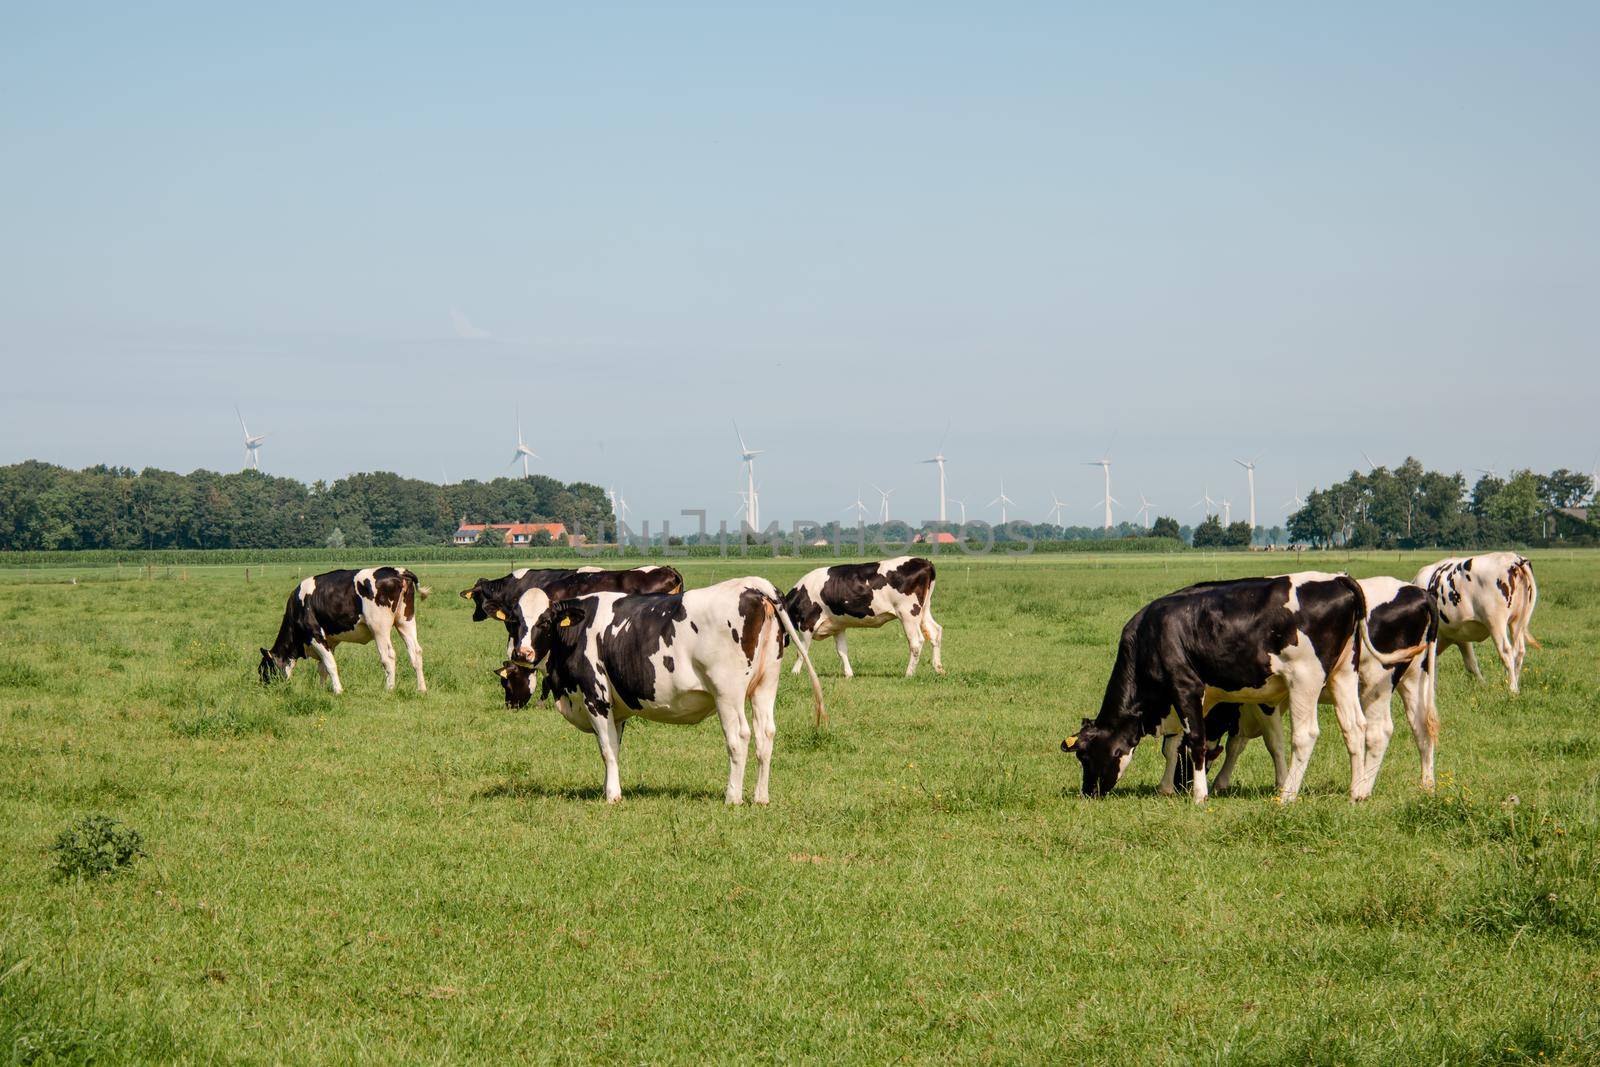 Dutch Brown and White cows mixed with black and white cows in the green meadow grassland, Urk Netherlands by fokkebok